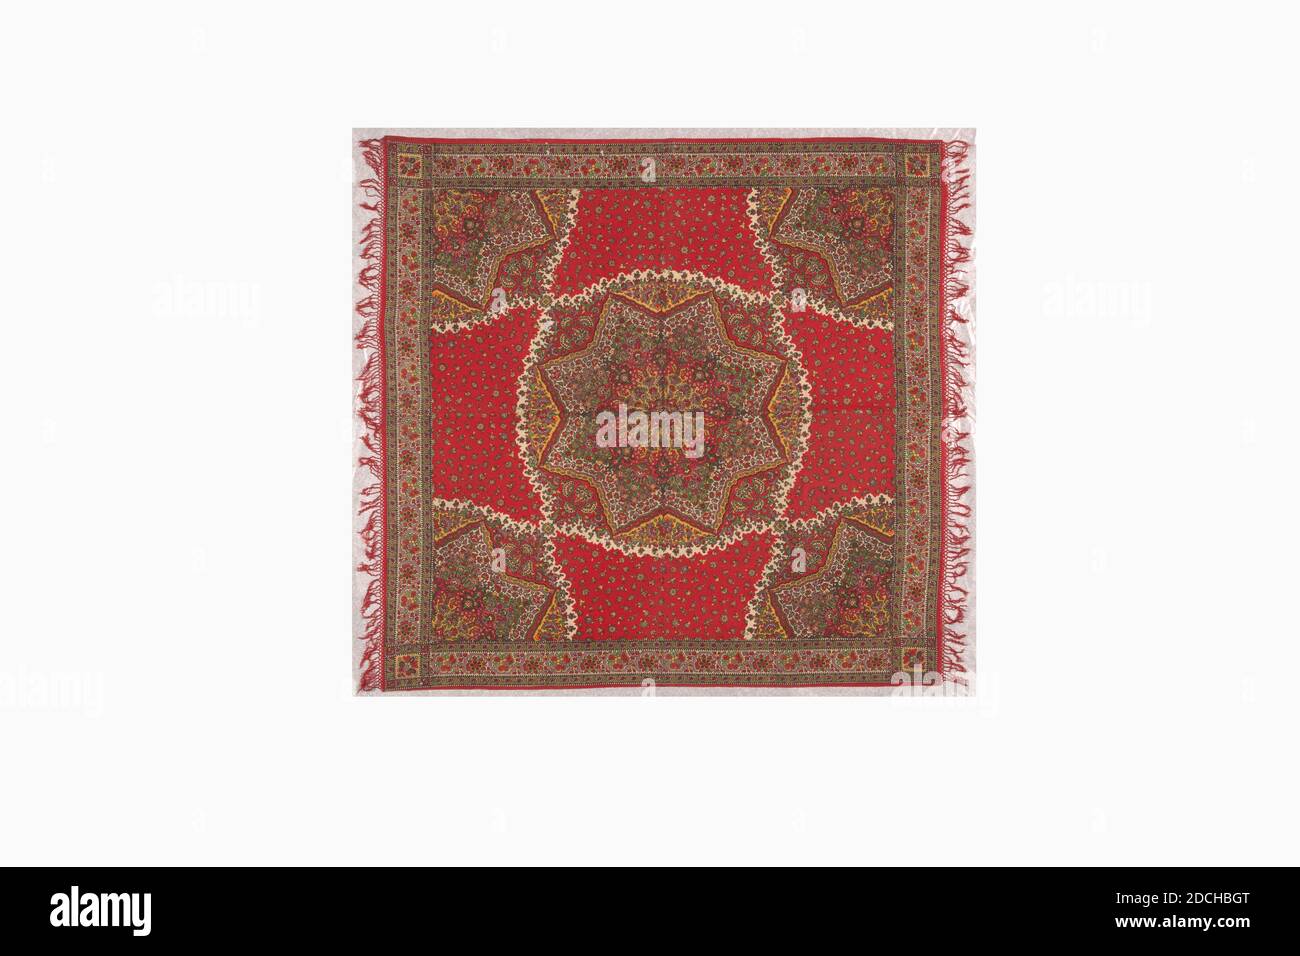 shawl, Anonymous, first quarter of the 19th century, General: 126 × 130cm (measured without fringe), General: 126 × 140cm (measured with fringe), star, flower, Shawl made of fine fabric, printed in the colors Turkish-red, white, black, yellow, green and lilac. In the center a large eight-pointed star filled with flower and leaf motifs. A quarter of the star (two points) is repeated in the four corners of the shawl. Between the star motifs small flowers on a Turkish-red background. The shawl is completely framed by a narrow red border followed by a wide flower border. Two sides finished with Stock Photo